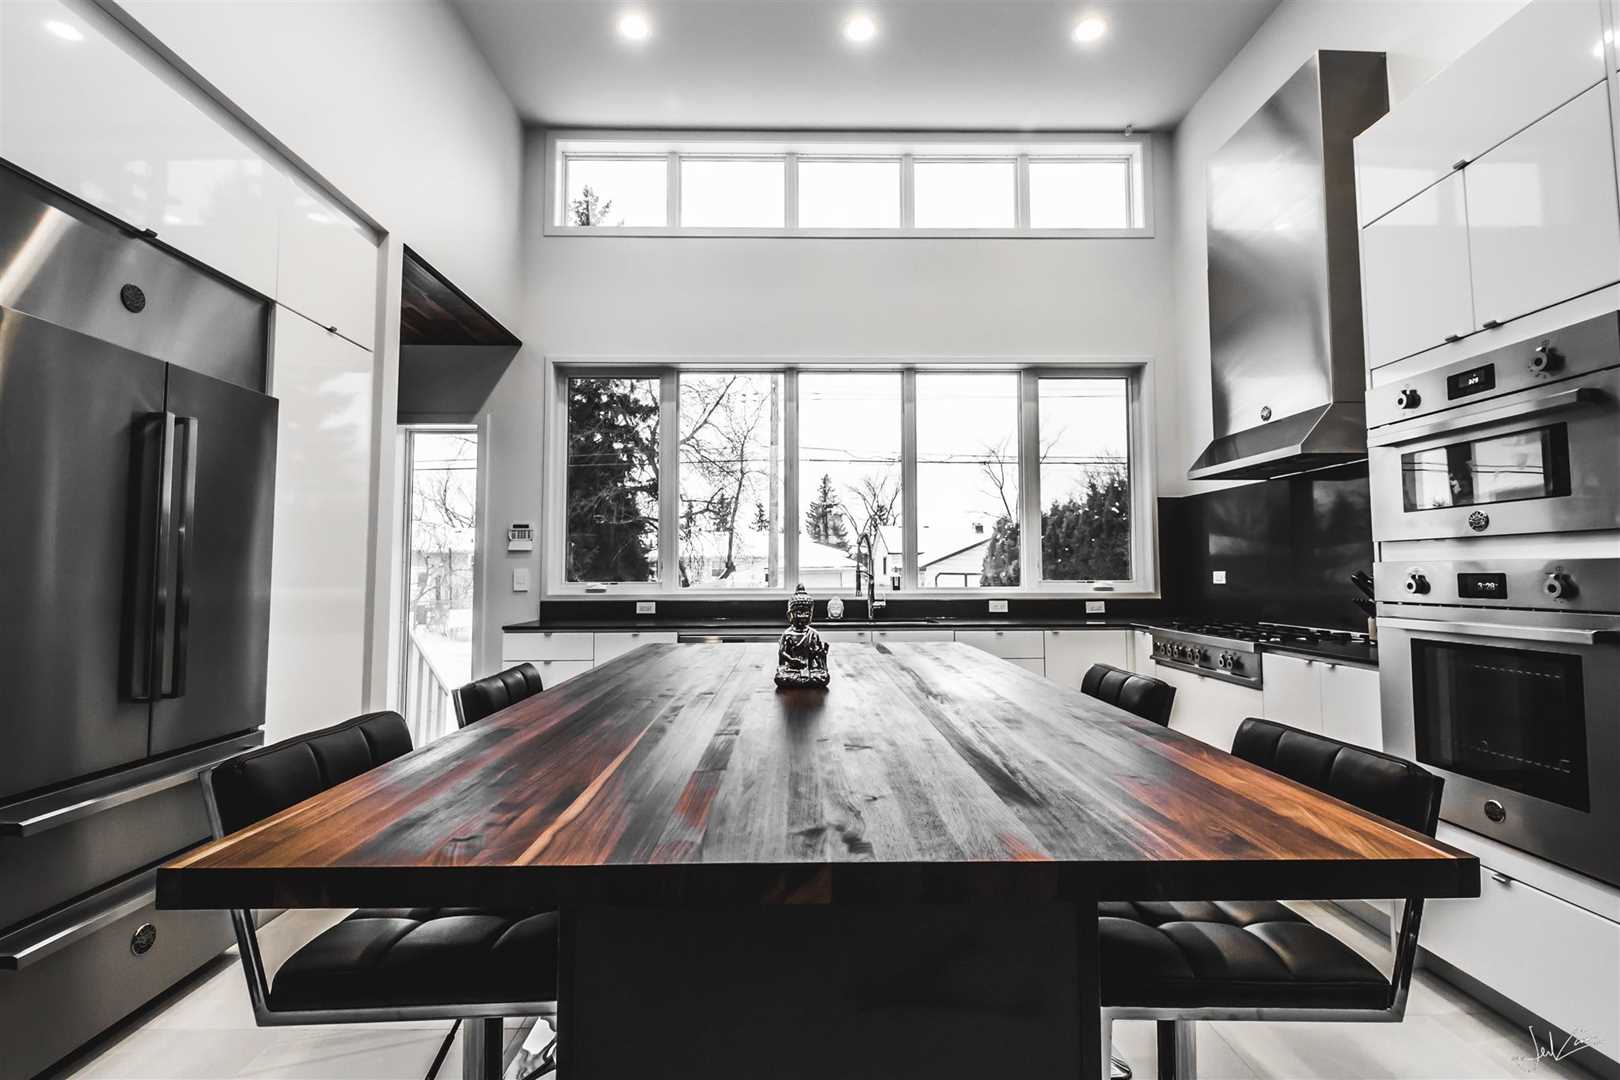 Dark wood table in centre of white kitchen with black appliances on left and right; looks out large windows in background